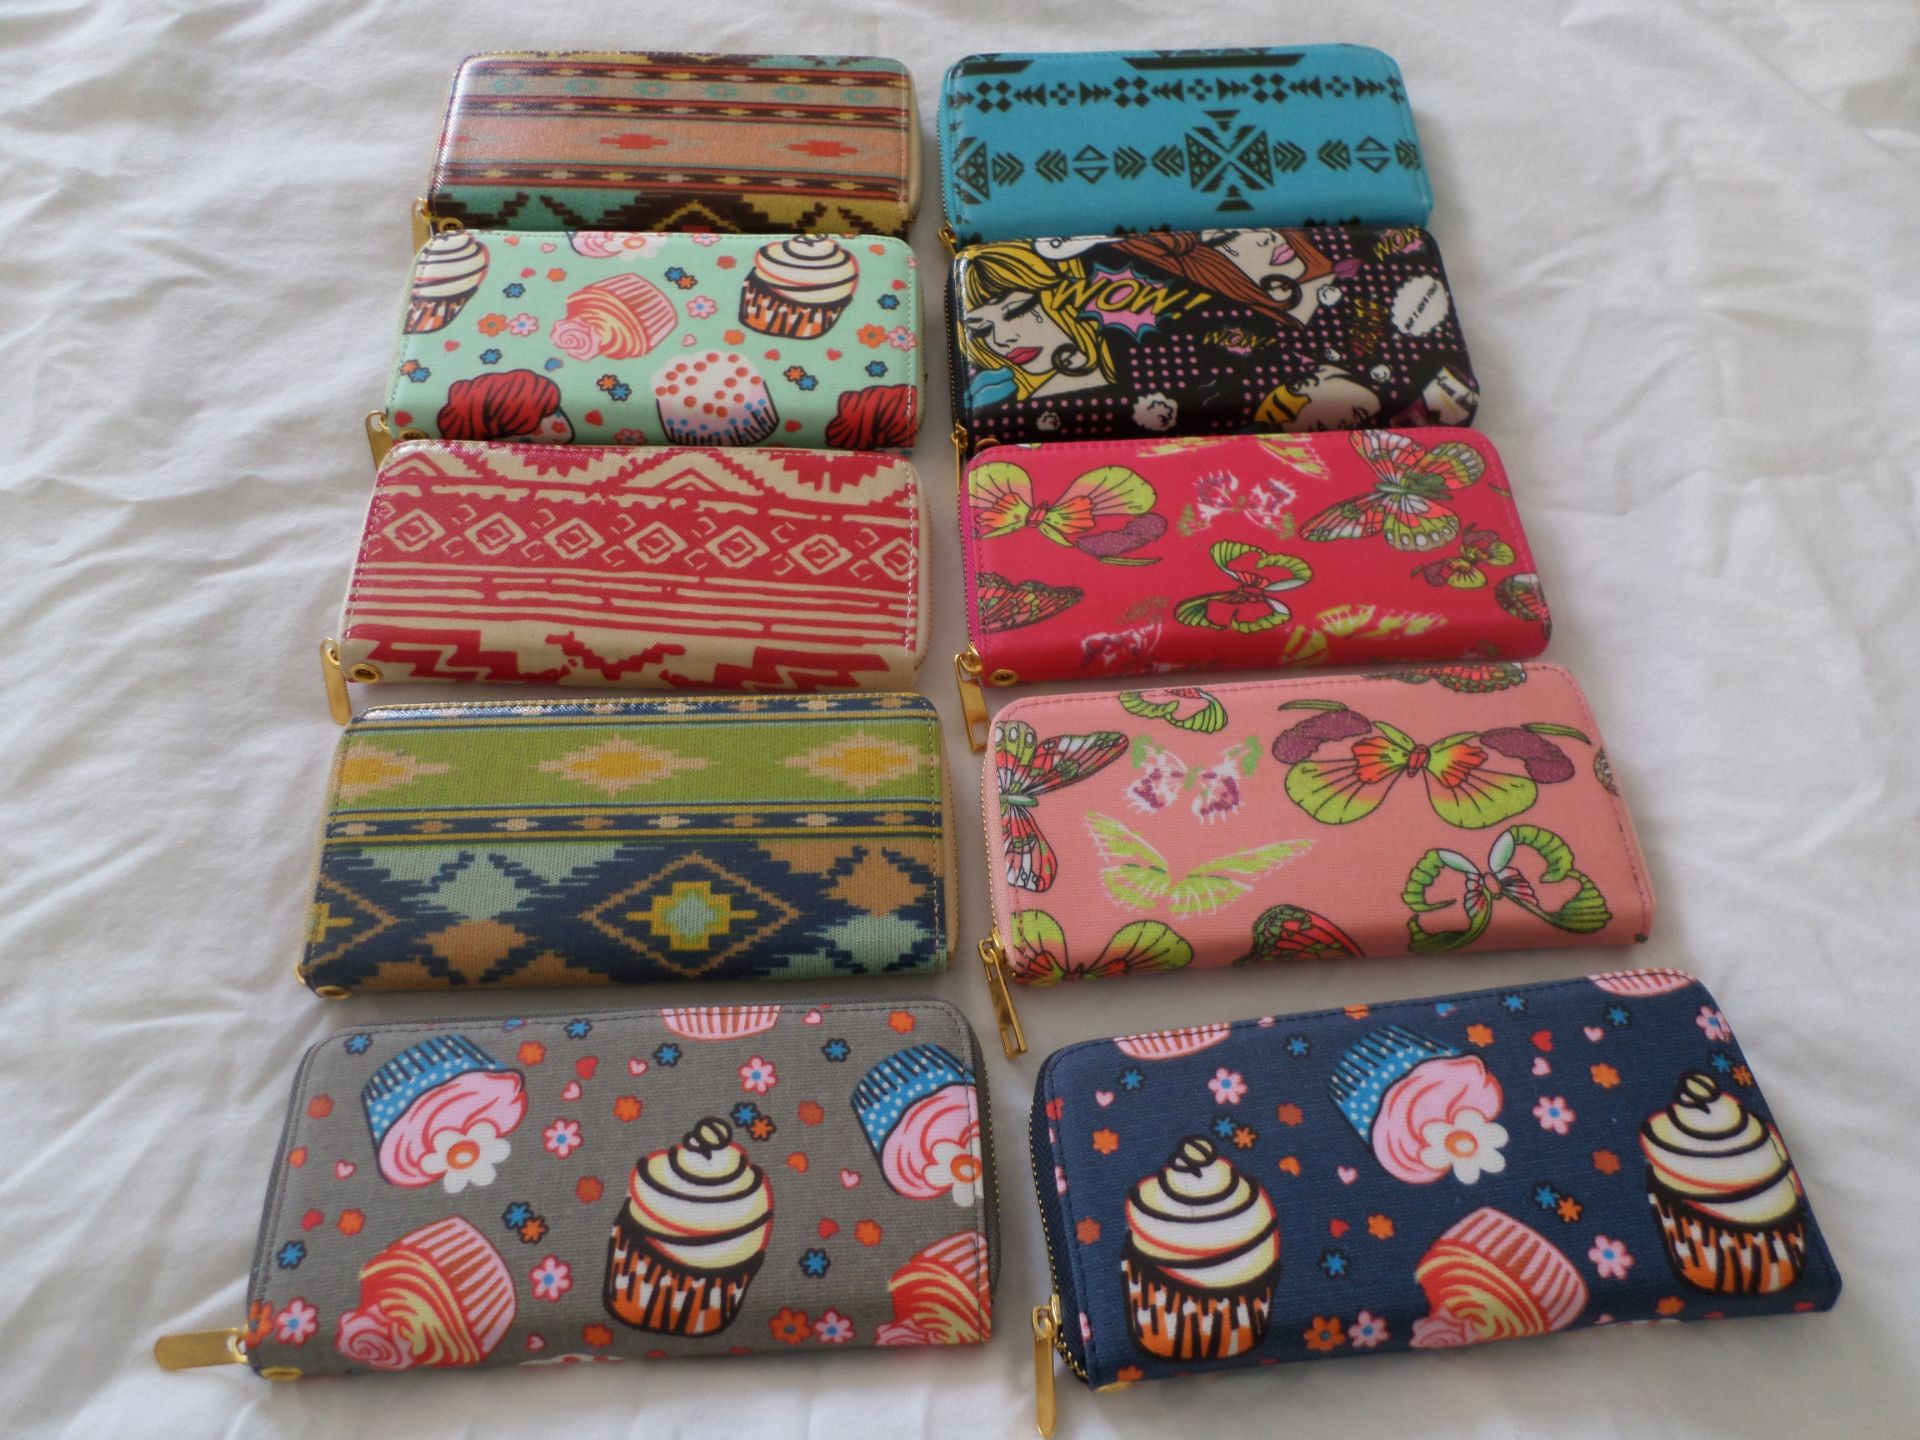 5 x Ladies Clutch/Purses RRP £14 Each. Brand New - Image 4 of 5